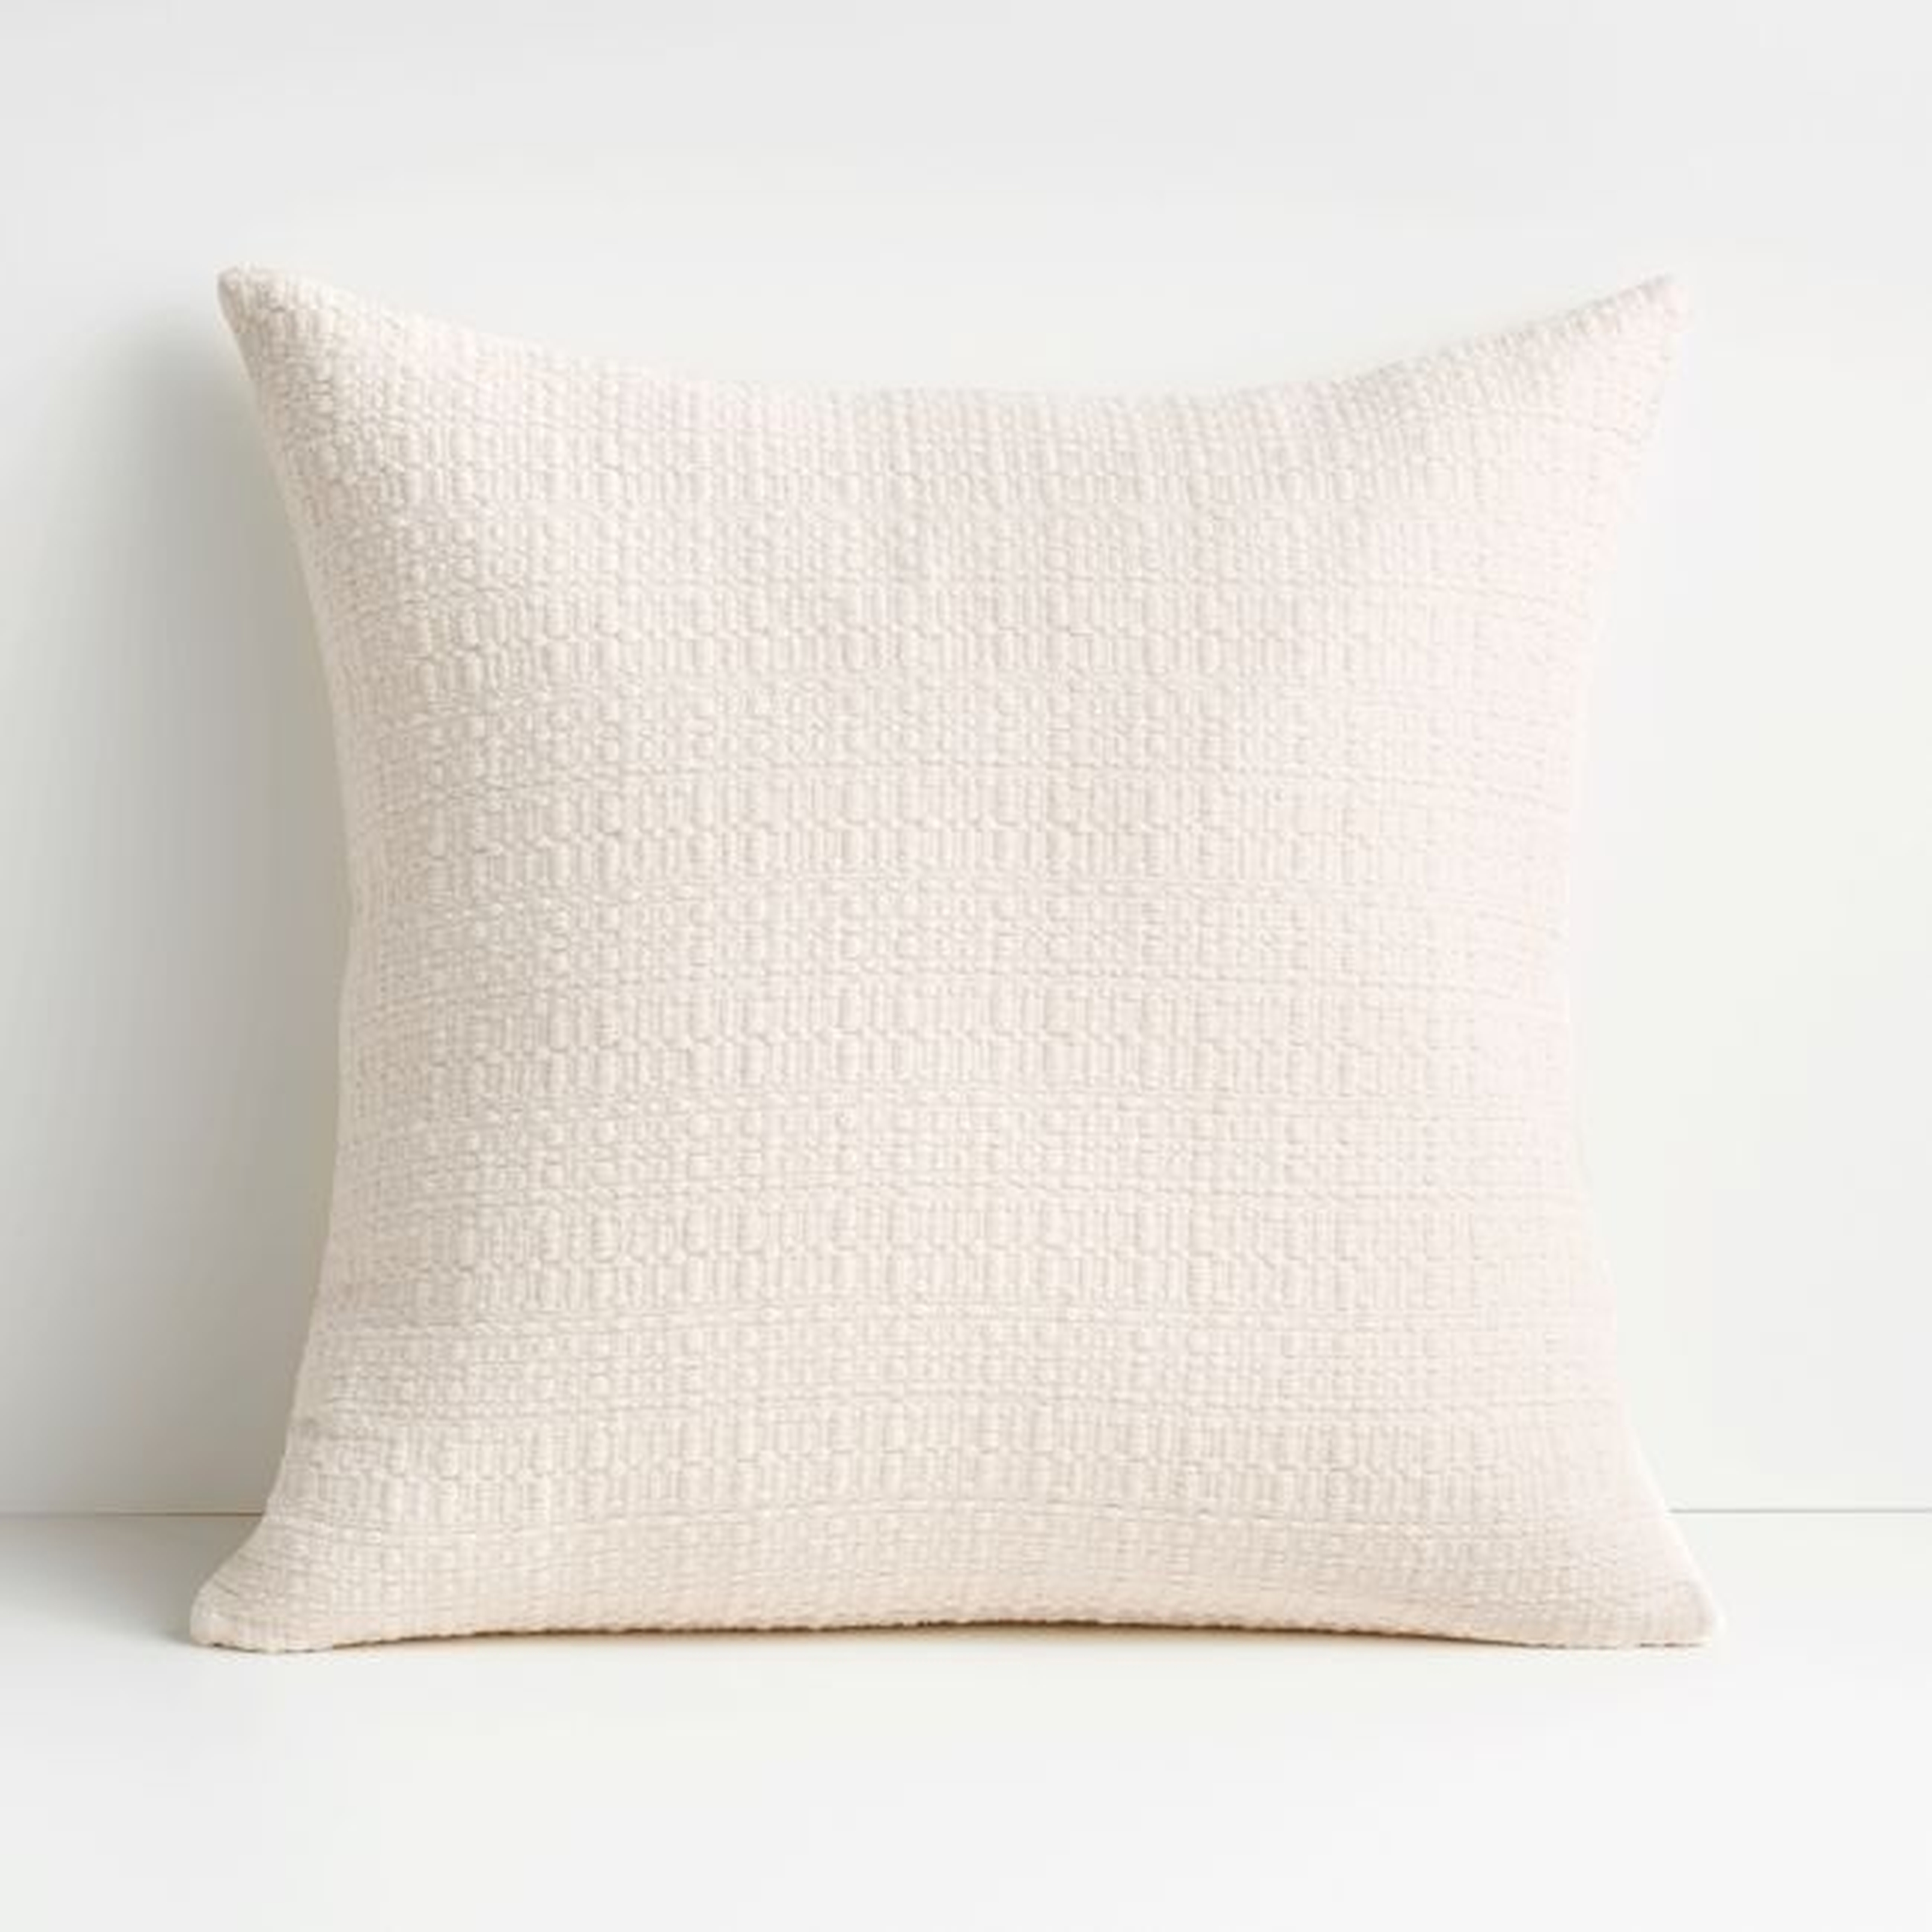 Bari 20"x20" White Swan Knitted Throw Pillow with Feather Insert - Crate and Barrel